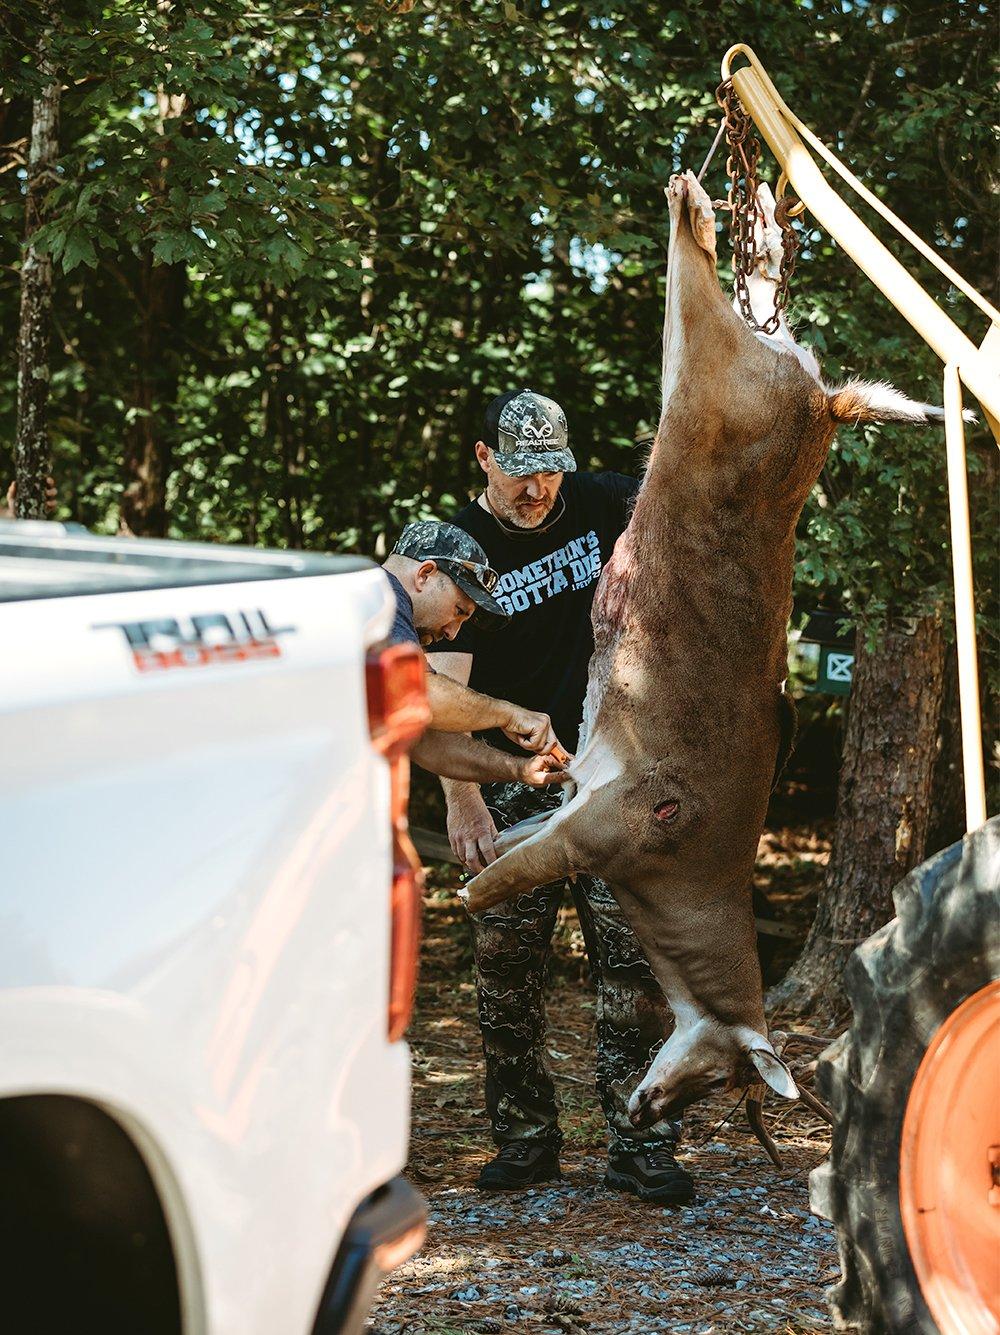 Having a gambrel to hang your deer from makes the task of skinning and quartering much faster and easier on your back. Image by Kerry Wix.